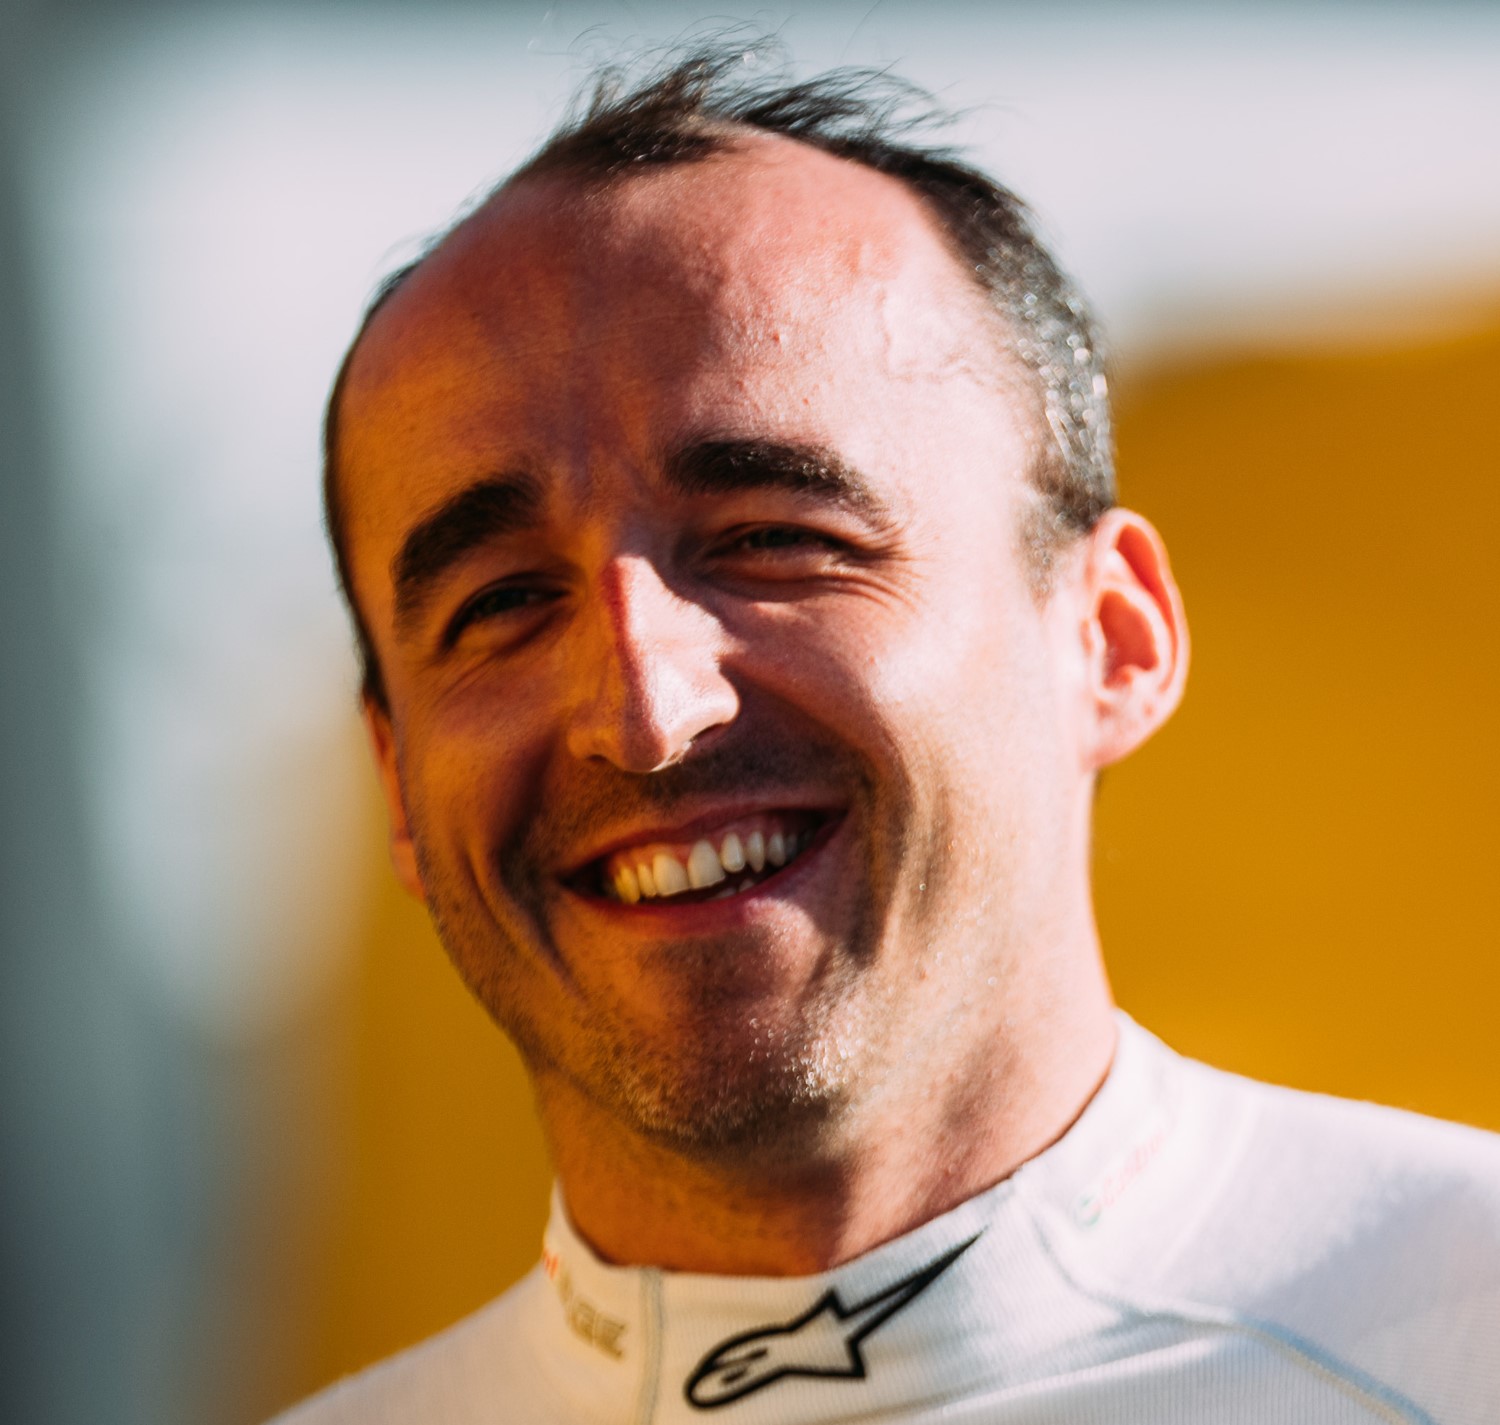 Kubica might not want to drive the slug Lowe designed. Could be career-ending